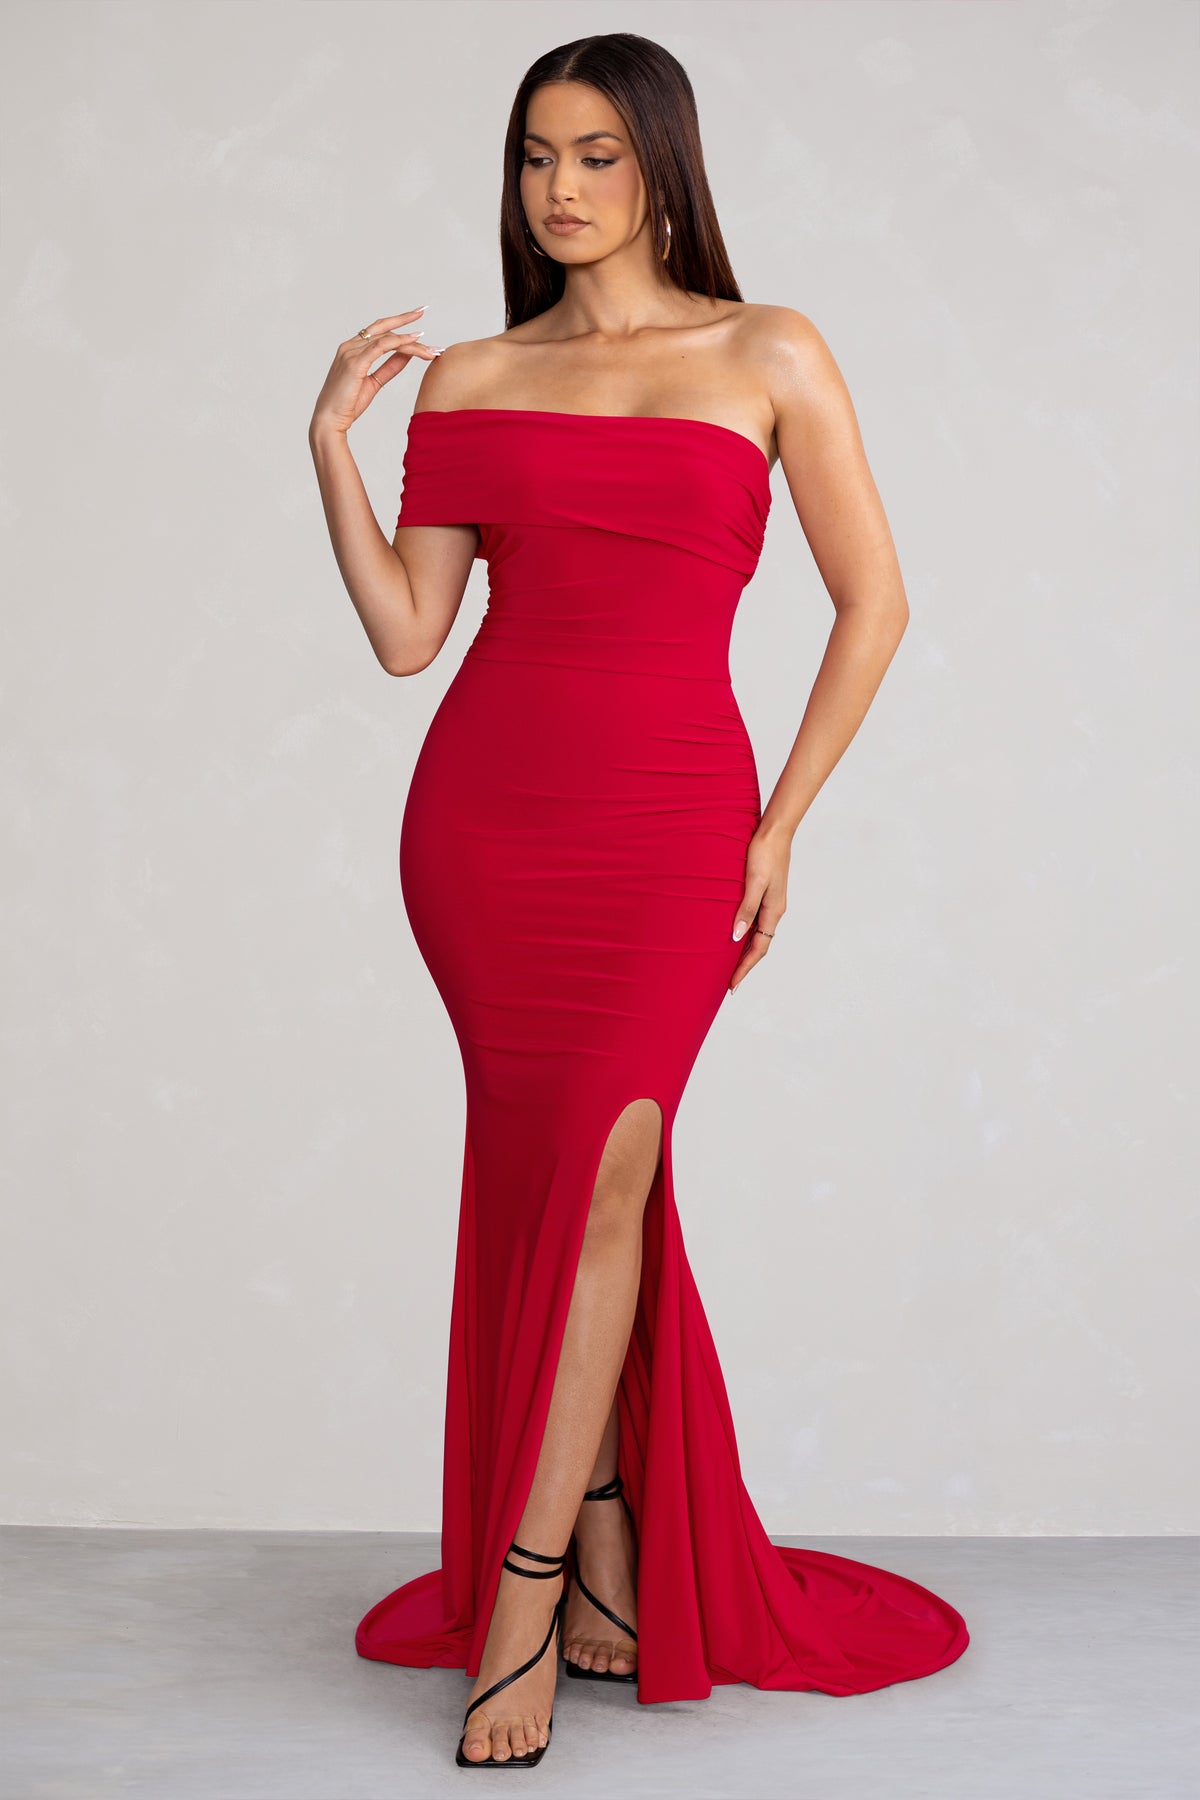 Sexy Red Maxi Dress - One-Shoulder Dress - Sultry Maxi Gown - Lulus